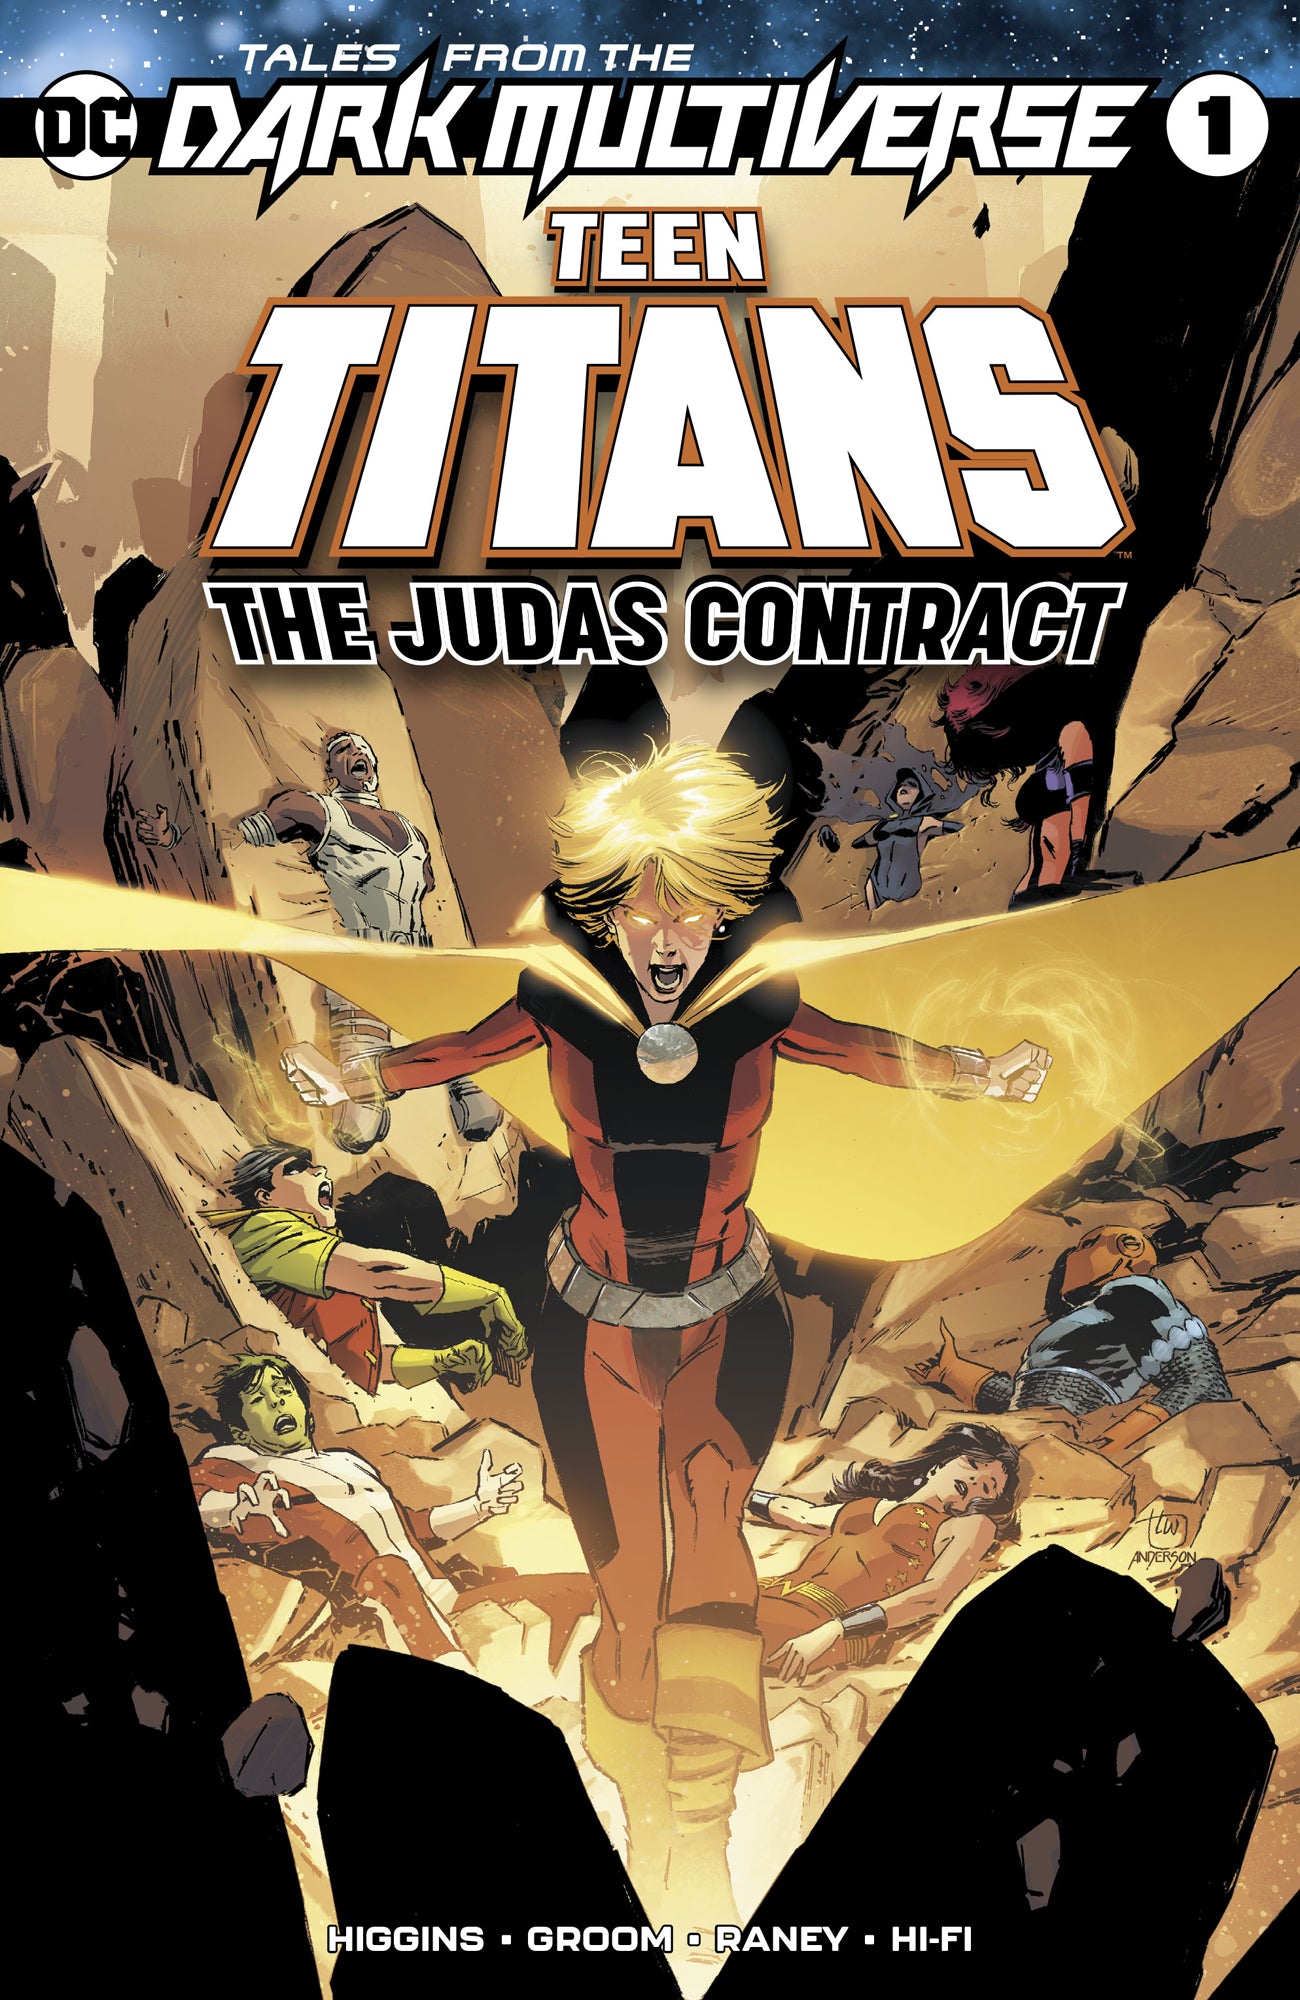 TALES FROM THE DARK MULTIVERSE THE JUDAS CONTRACT #1